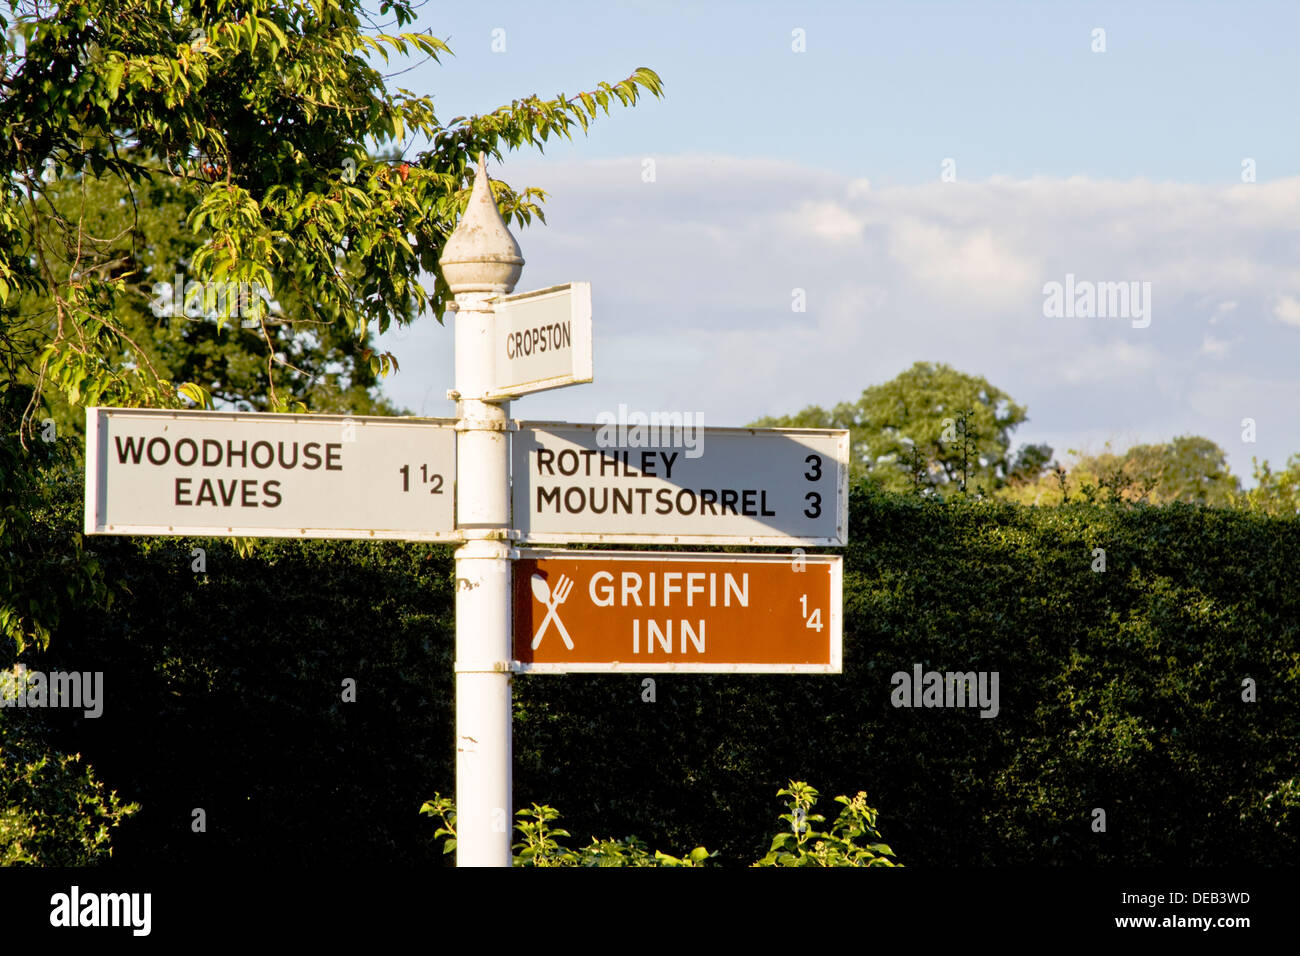 Sign Posts In The Village Of Swithland In Leicestershire Stock Photo